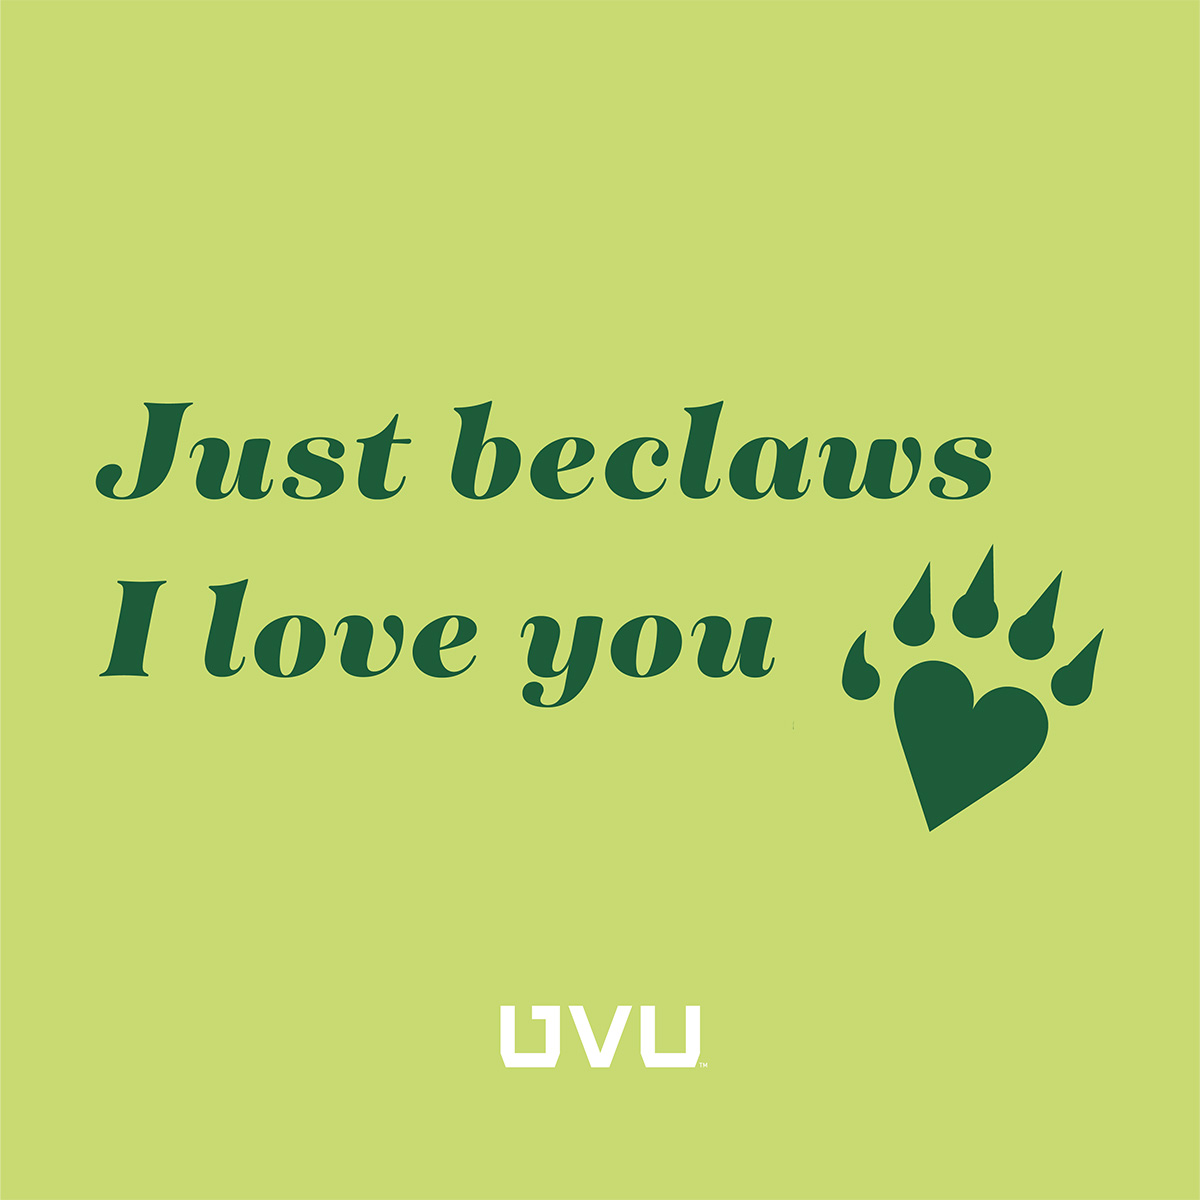 "Just beclaws I love you" Instagram post